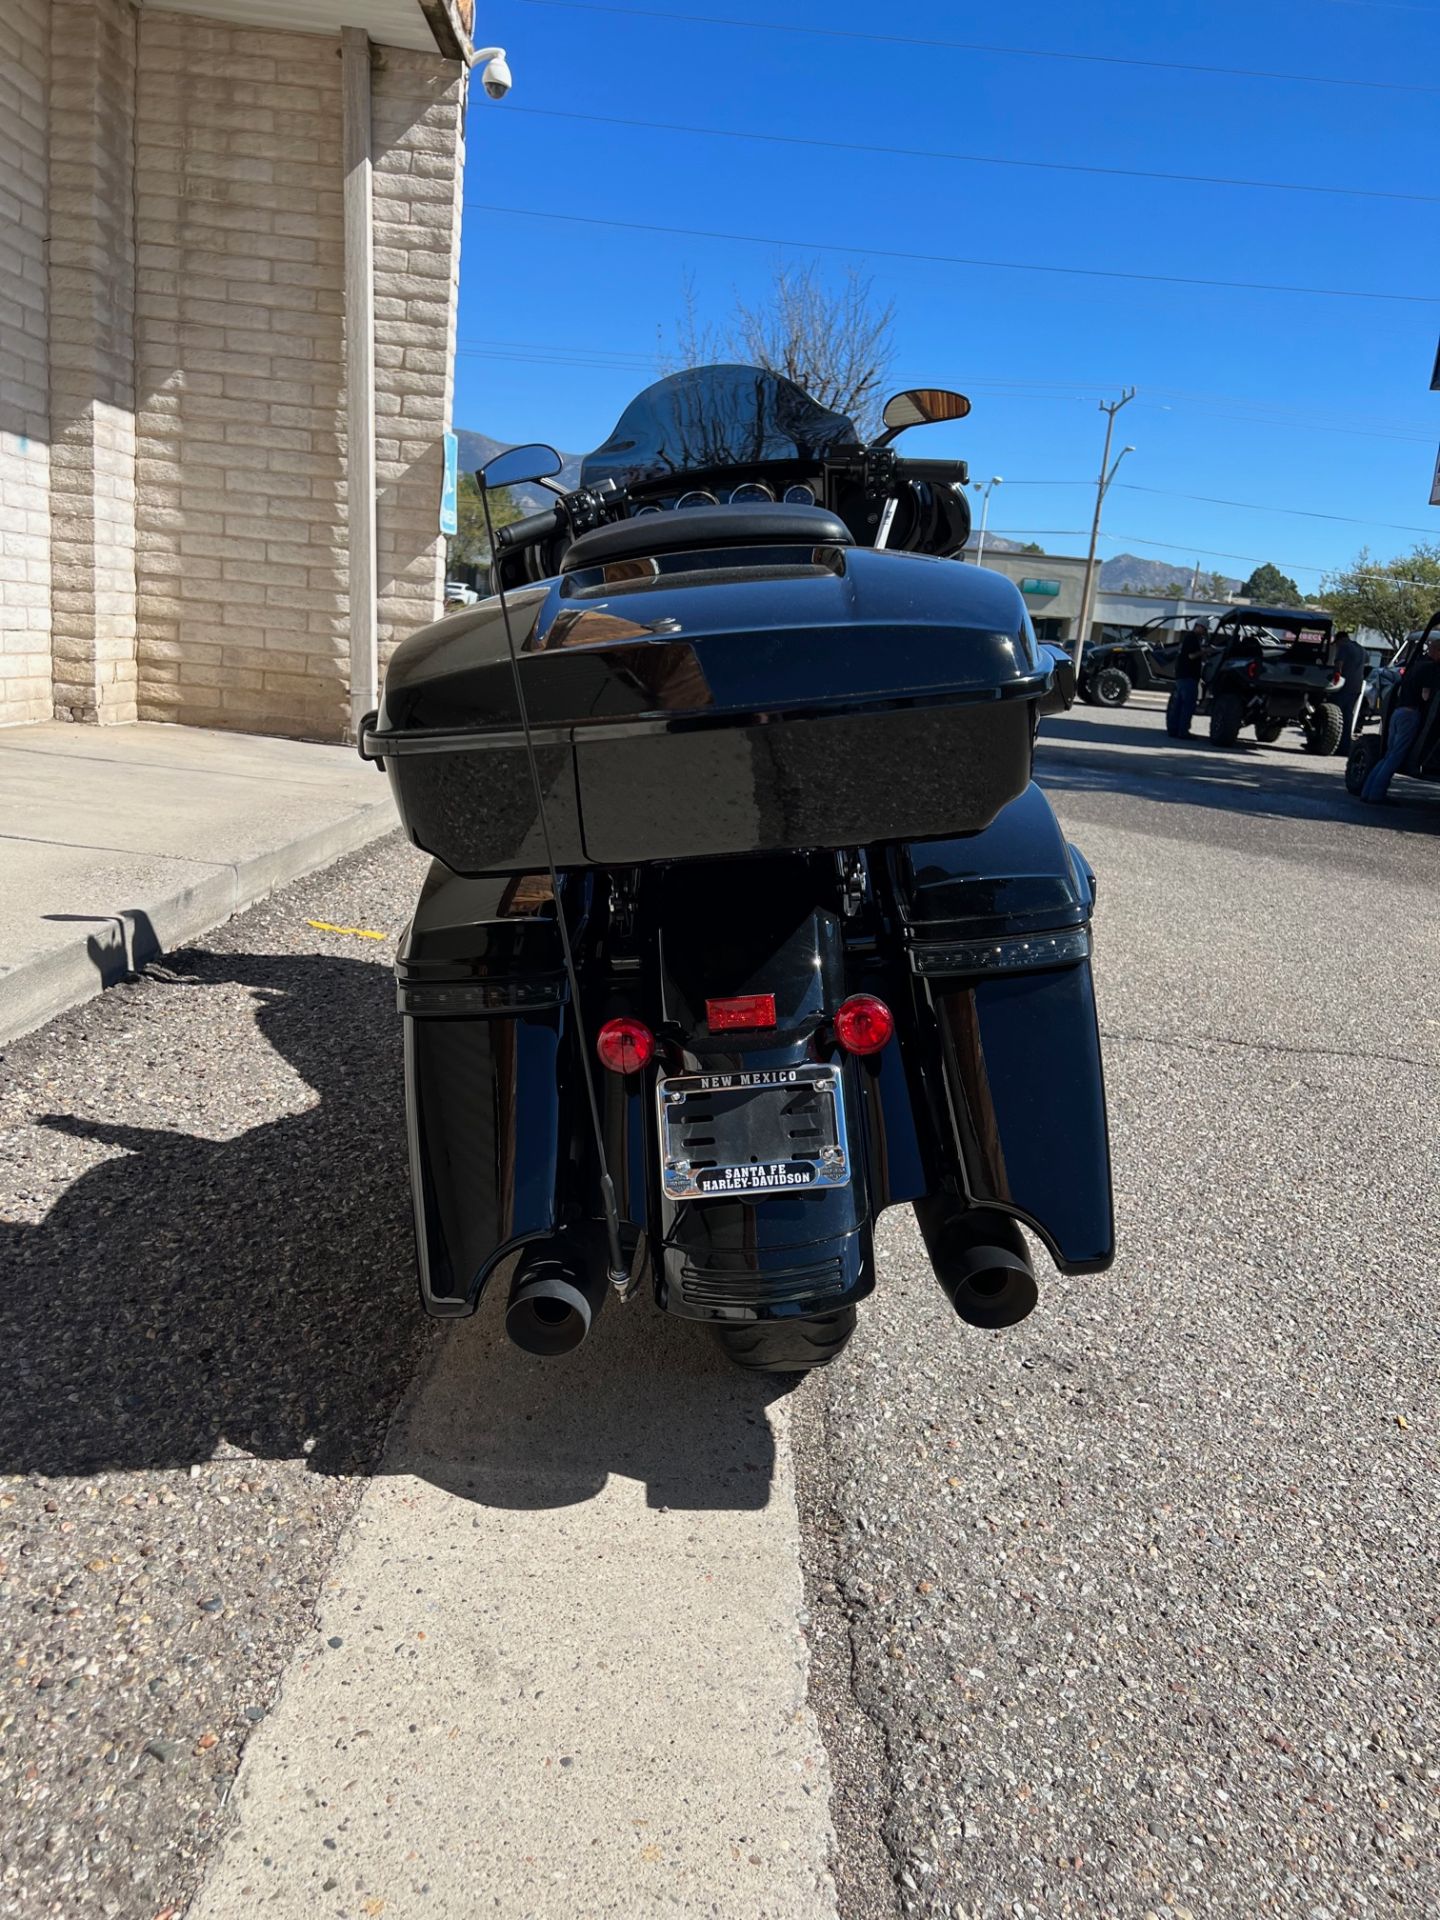 2018 Harley-Davidson Street Glide® Special in Albuquerque, New Mexico - Photo 2